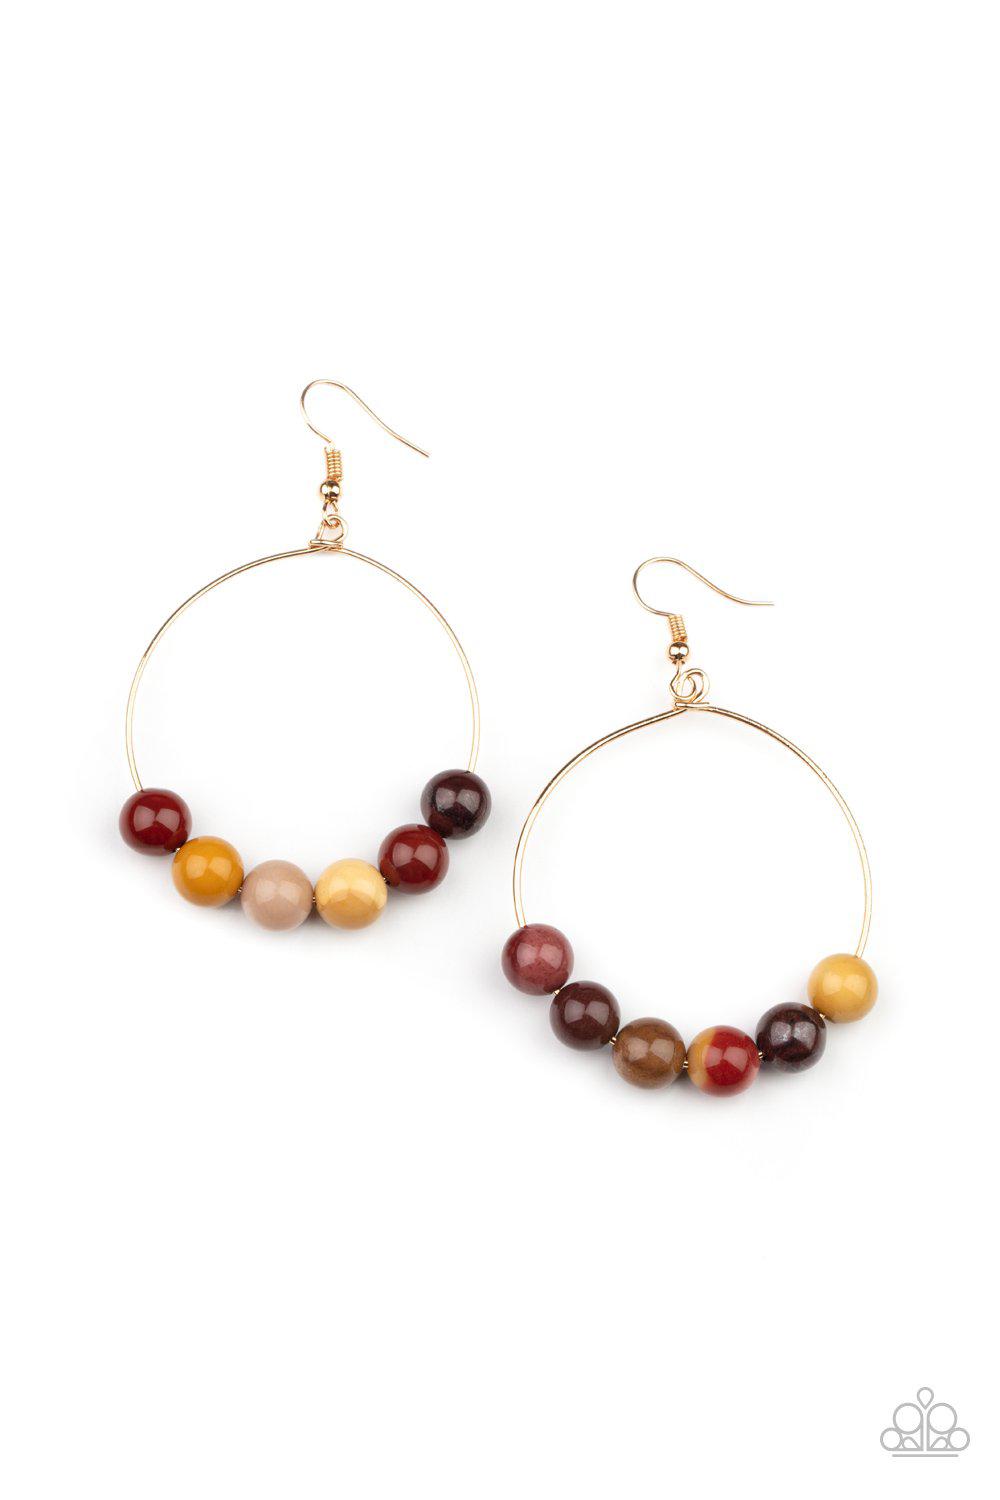 Let It Slide Multi-color Stone Earrings - Paparazzi Accessories- lightbox - CarasShop.com - $5 Jewelry by Cara Jewels